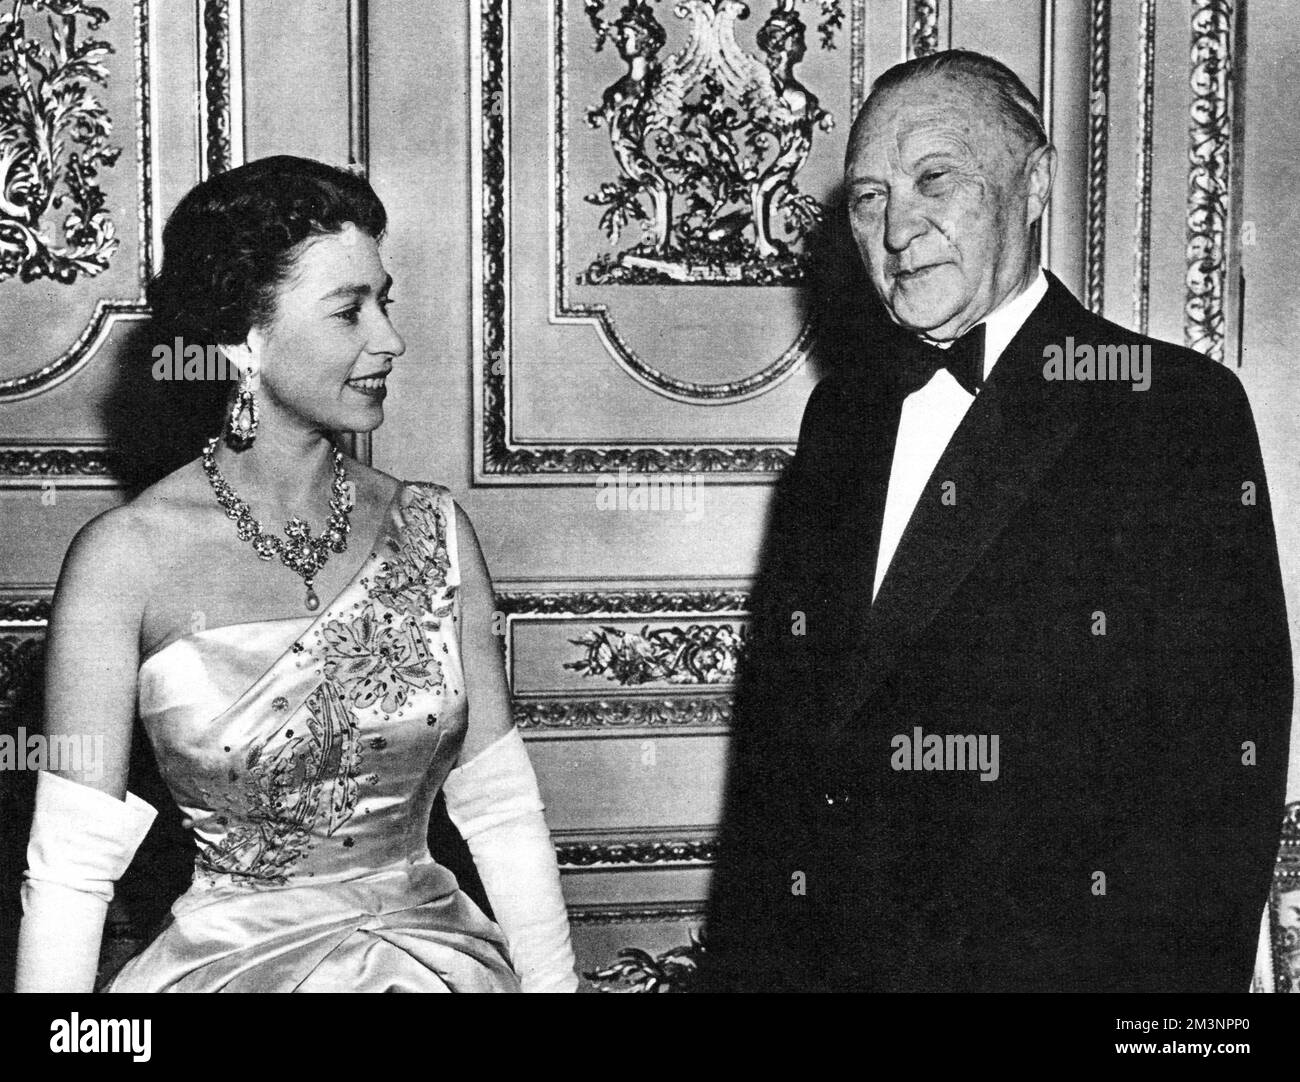 Queen Elizabeth II pictured with the Federal German Chancellor, Dr Konrad Adenauer at Windsor Castle during a dinner party given by Her Majesty and the Duke of Edinburgh, during a four day official visit of Adenauer to Britain.       Date: 1958 Stock Photo